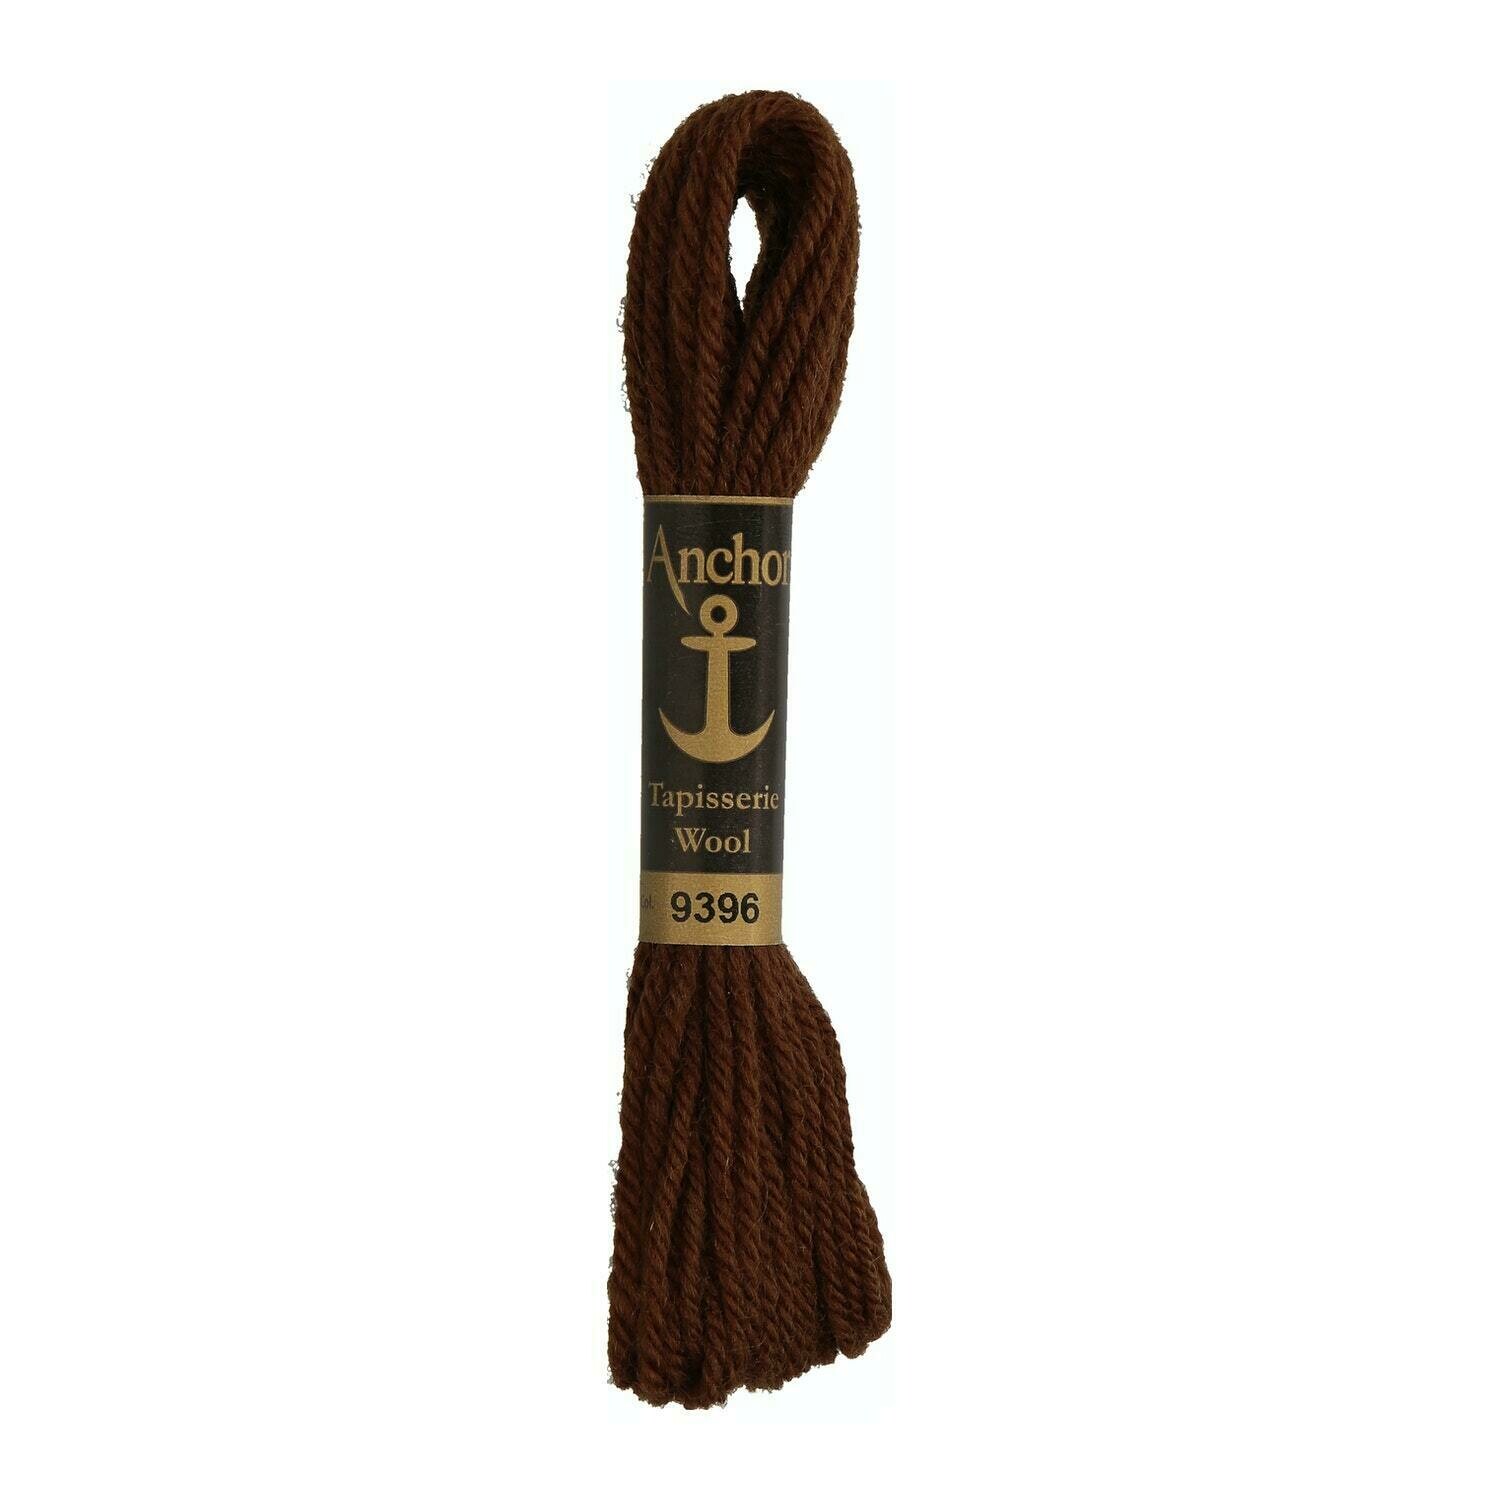 Anchor Tapisserie Wool #09396